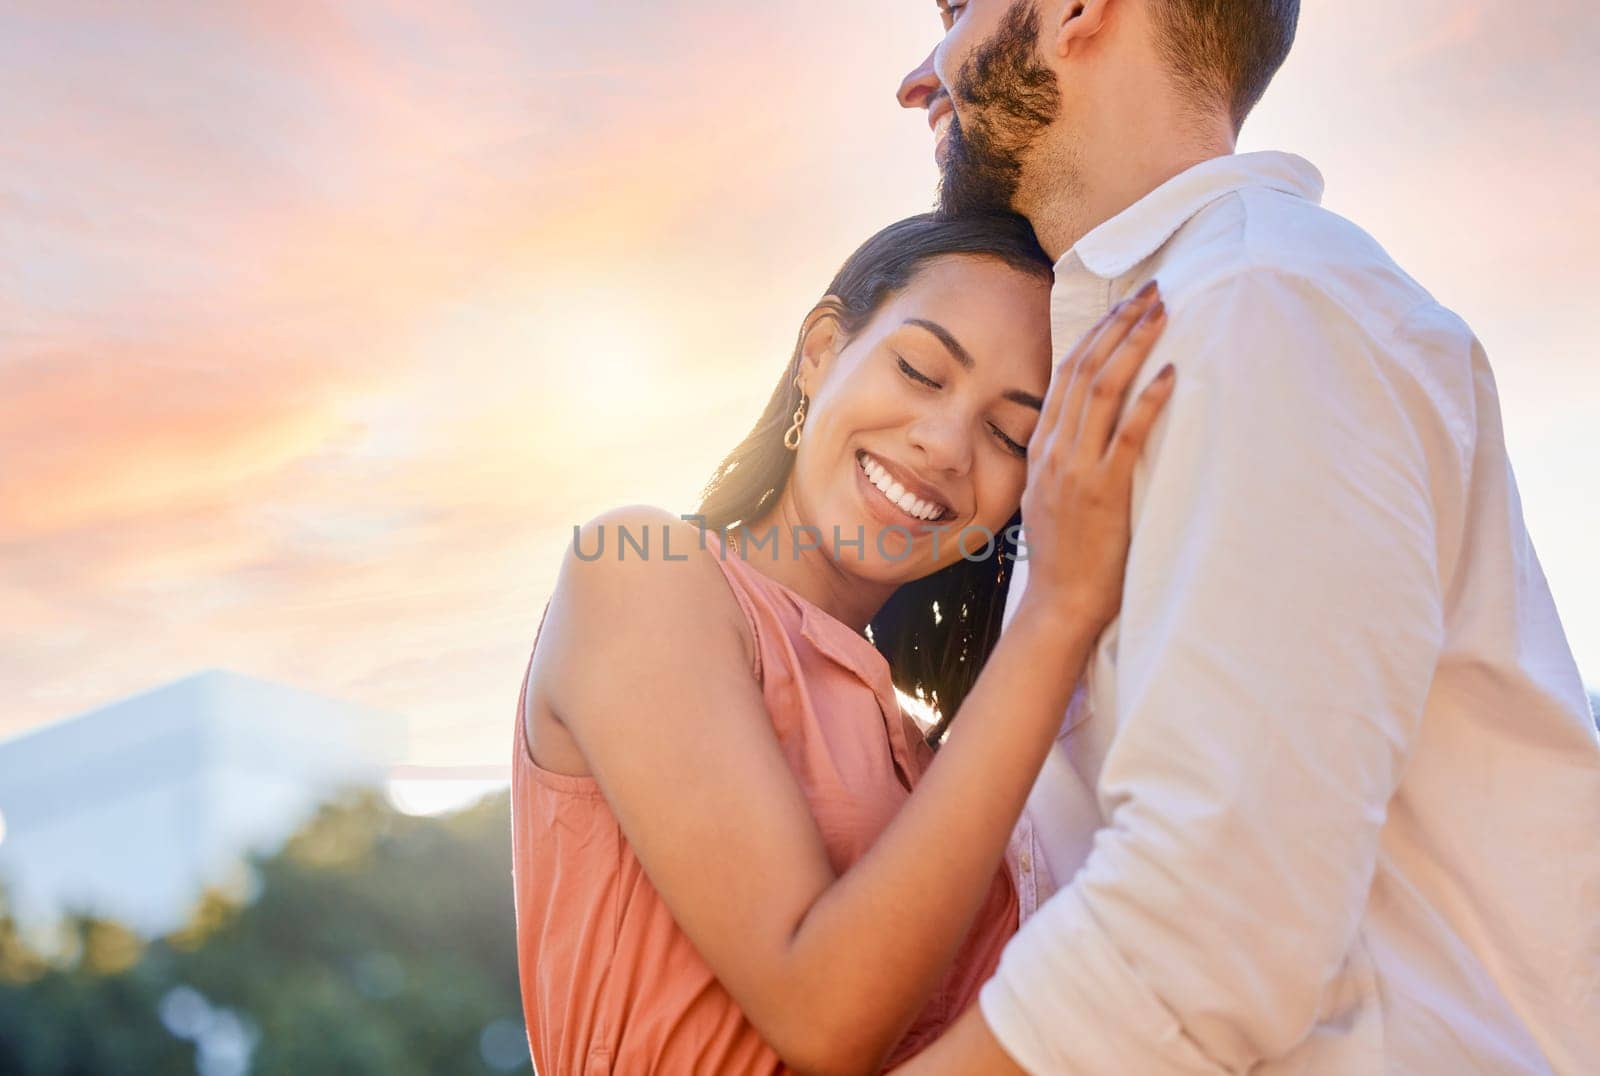 Couple, smile and hug for love, support or care for relationship bonding or embrace together in the outdoors. Happy woman hugging man embracing romance and smiling in happiness for fun quality time by YuriArcurs